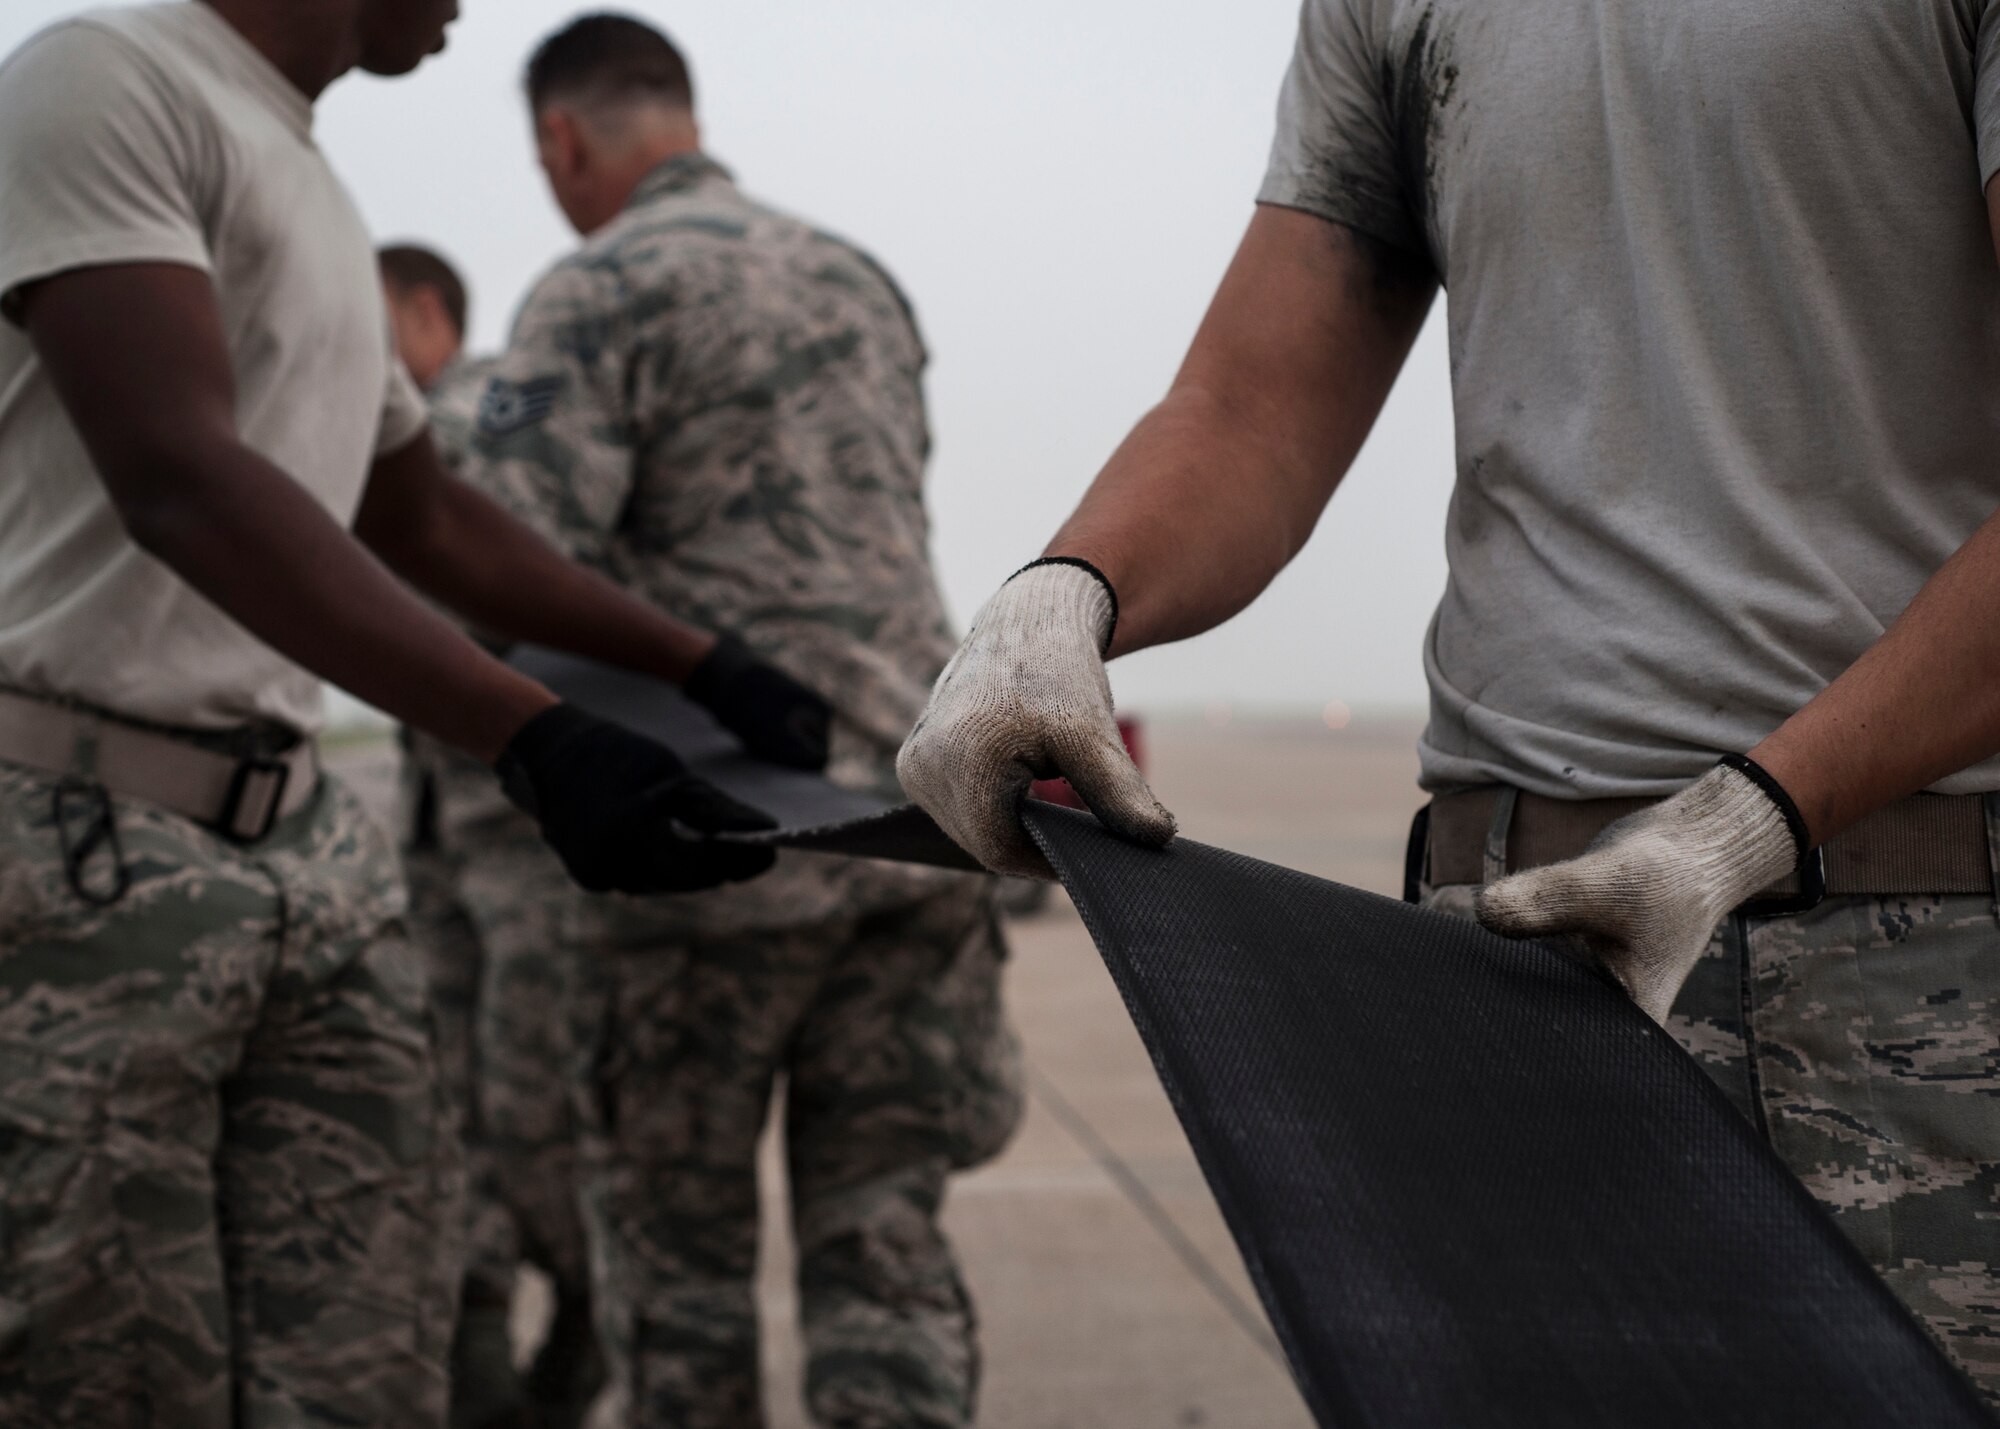 U.S. Air Force Airmen assigned to the 8th Civil Engineer Squadron perform maintenance by extending and flipping the barrier tape on the aircraft arresting system at Kunsan Air Base, Republic of Korea, Sept. 9, 2017.  The aircraft arresting system is a barrier used to catch the arresting hook located on fighter aircraft in the event of a malfunction during landing or take off. There are a total of seven aircraft arresting systems on the airfield requiring daily maintenance performed on them to ensure they are operational. (U.S. Air Force photo by Staff Sgt. Victoria H. Taylor)